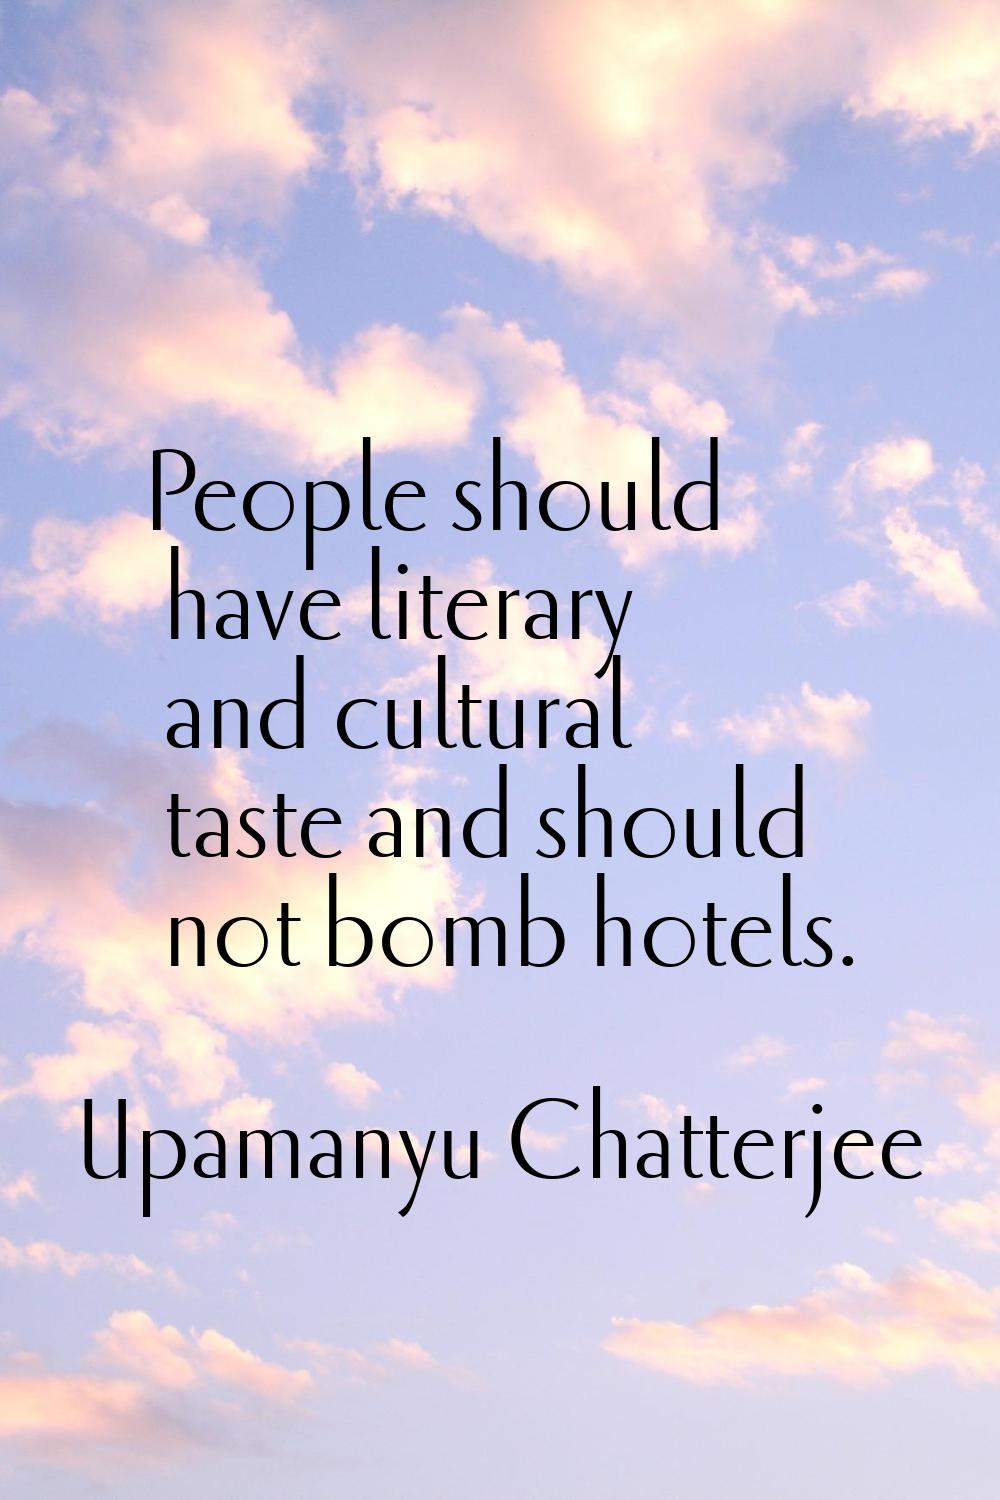 People should have literary and cultural taste and should not bomb hotels.